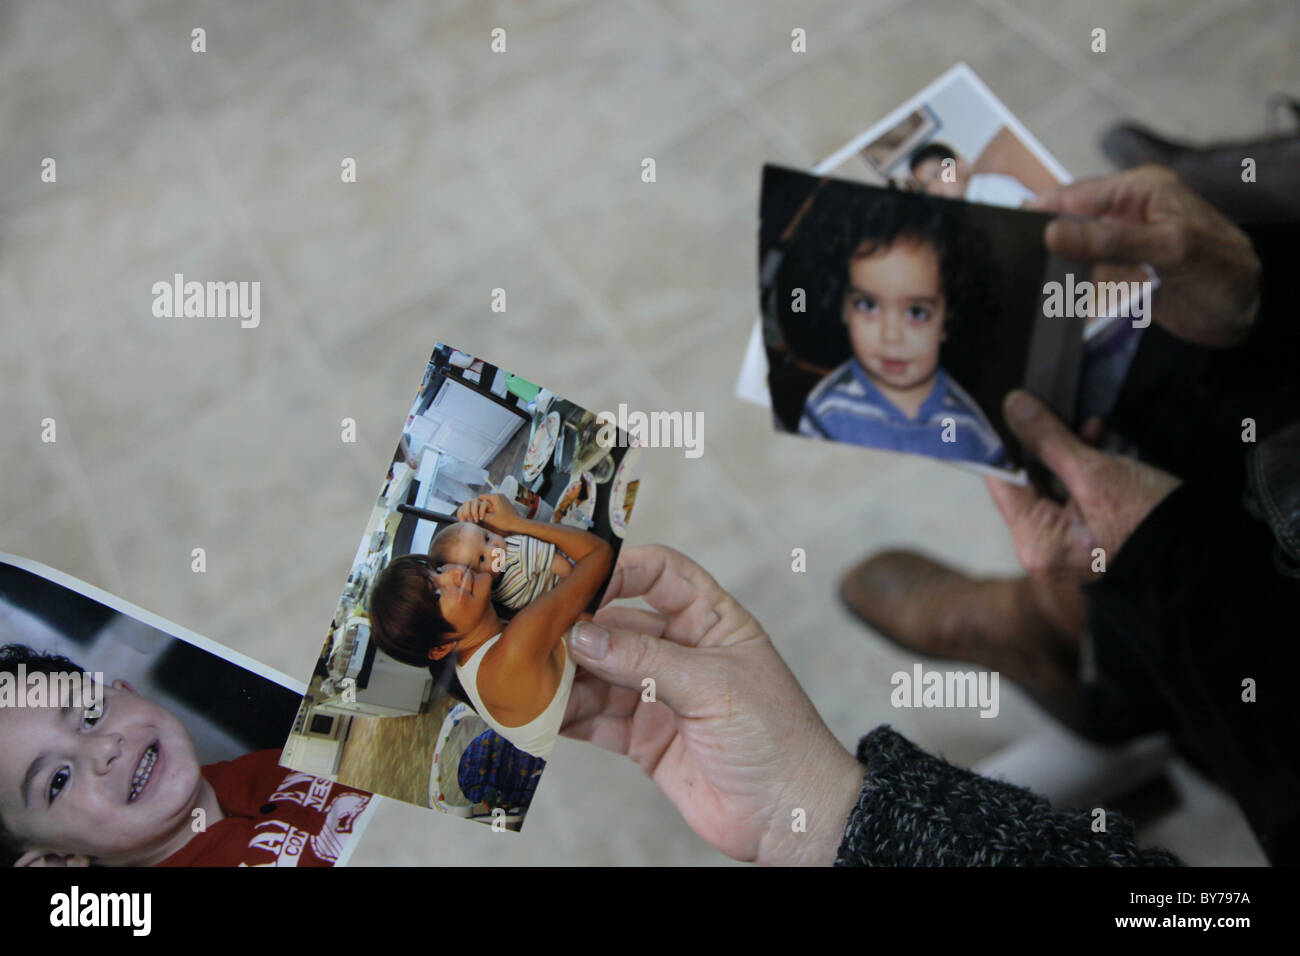 People holding family photographs in Israel Stock Photo